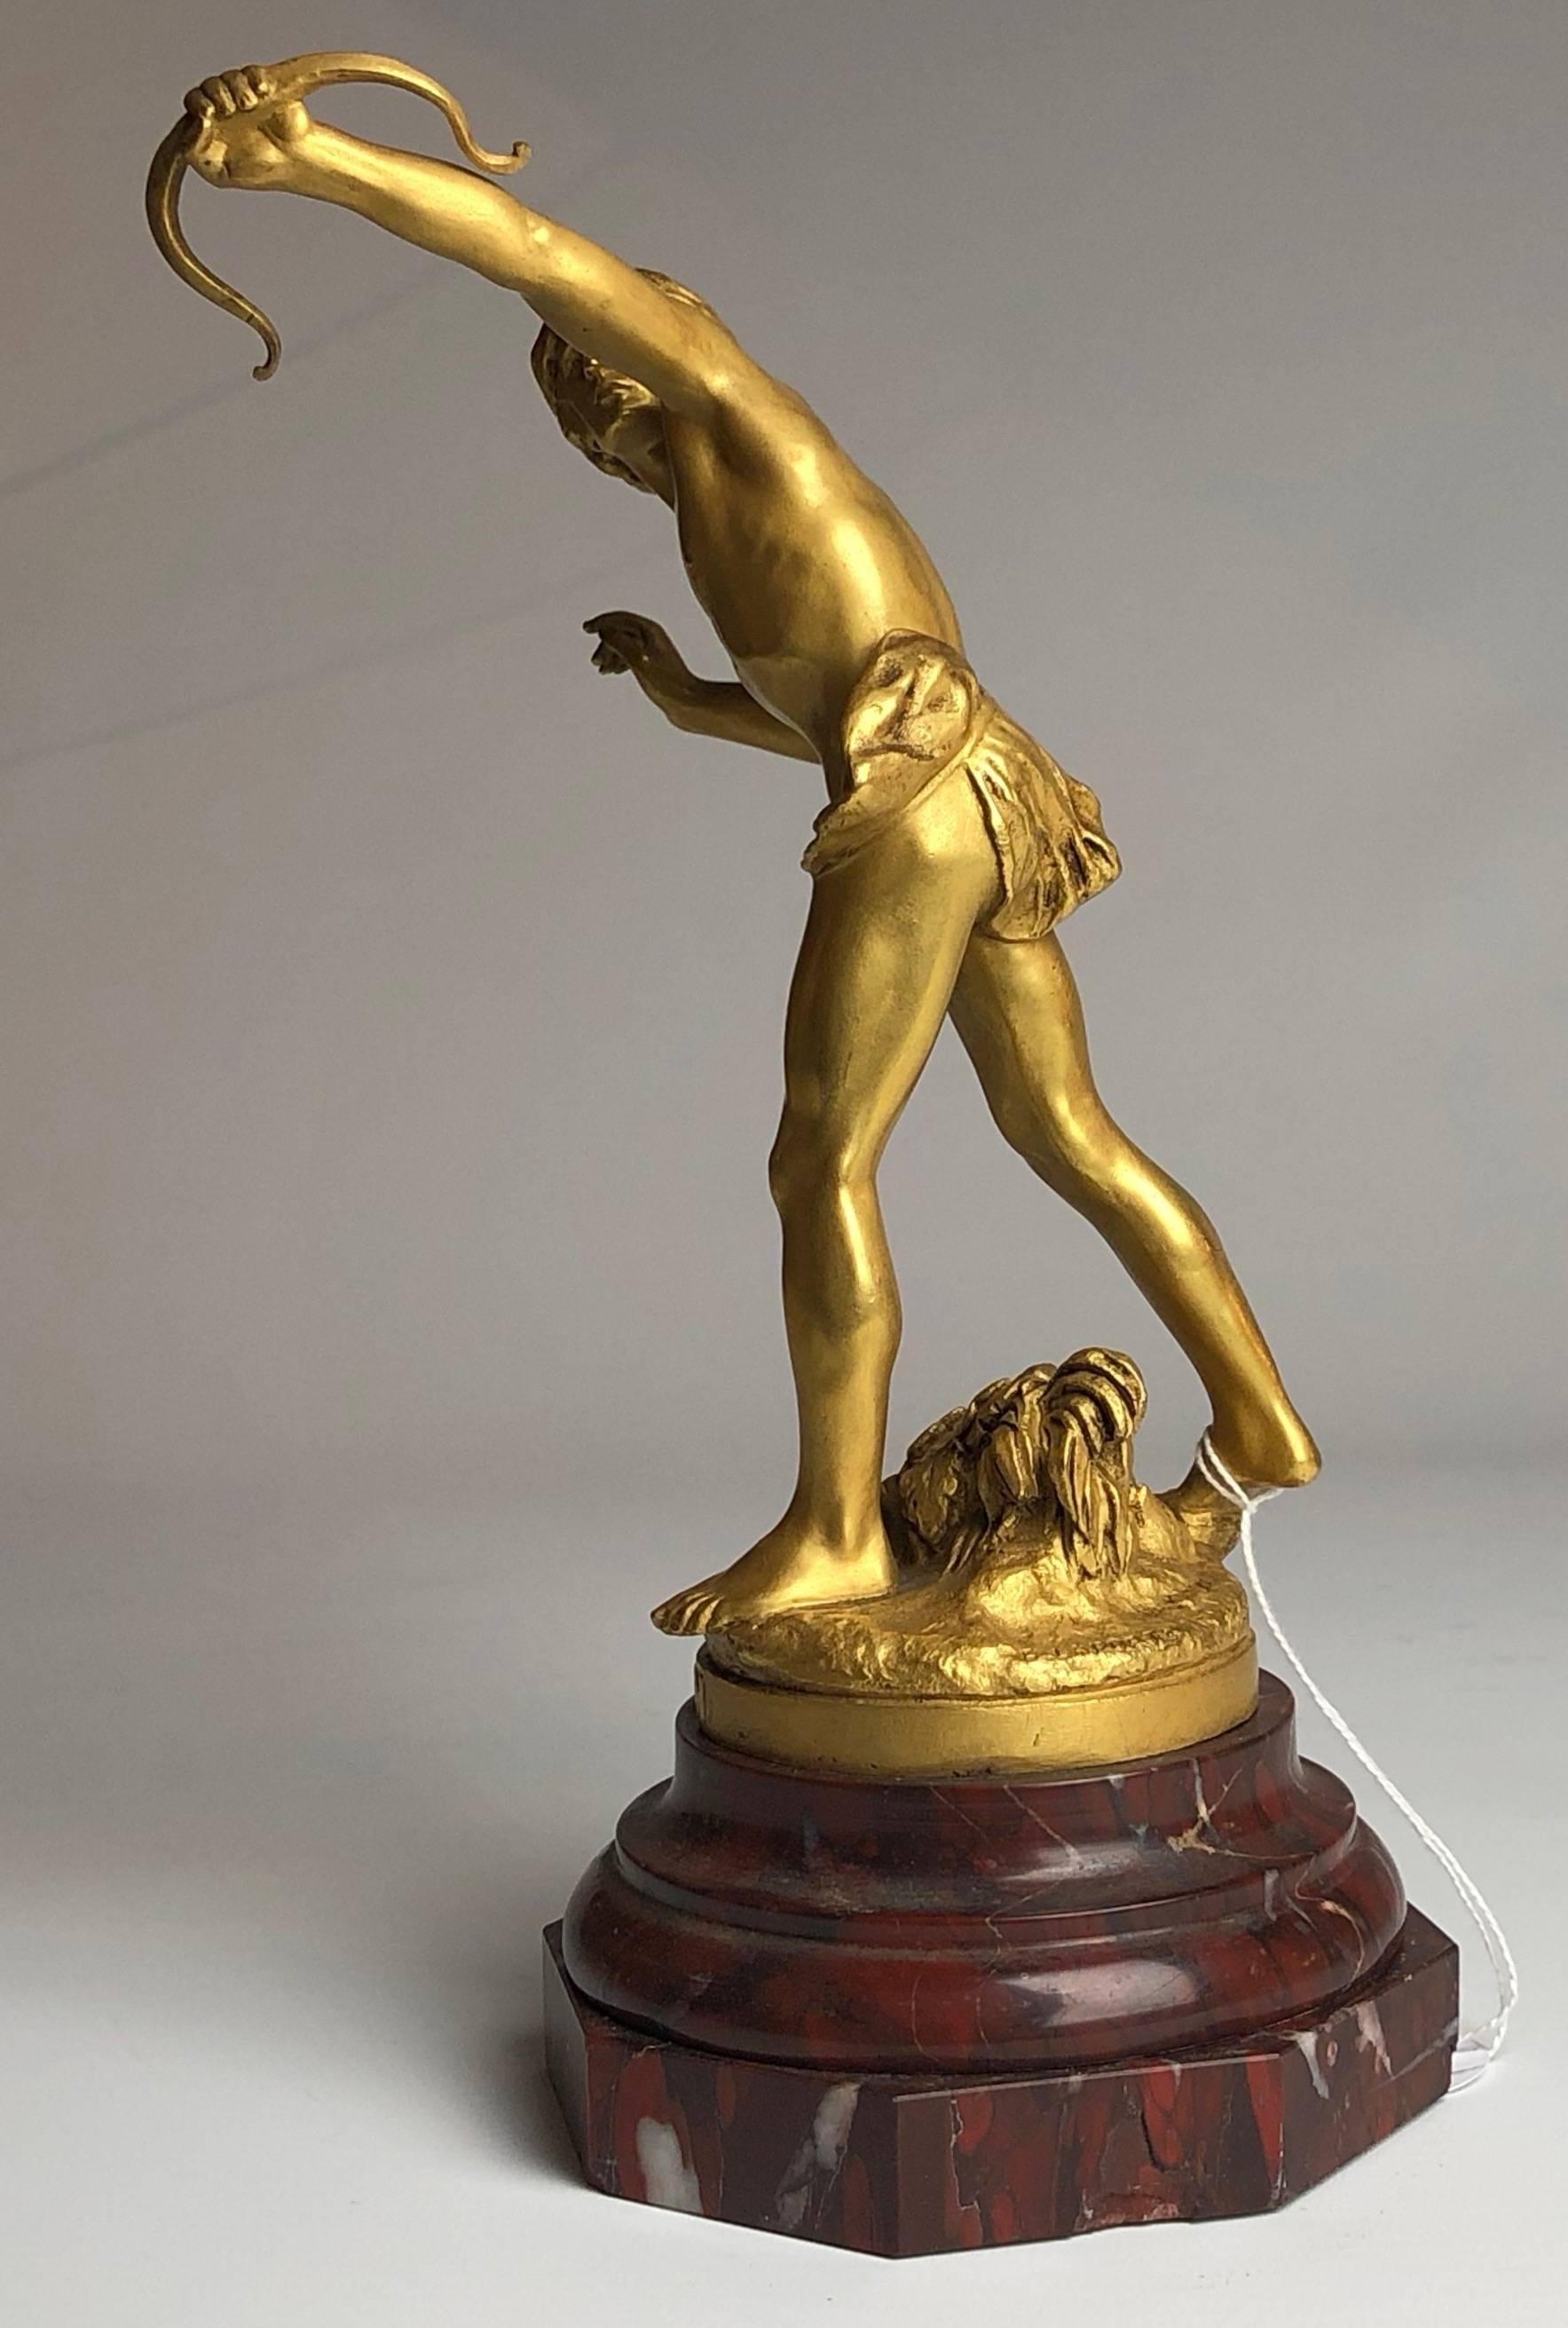 A good quality French bronze of Acteon on a reuge marble base
Signed E.Laporte, Paris.

France, circa 1890.

Measures: The figure stands just under 9